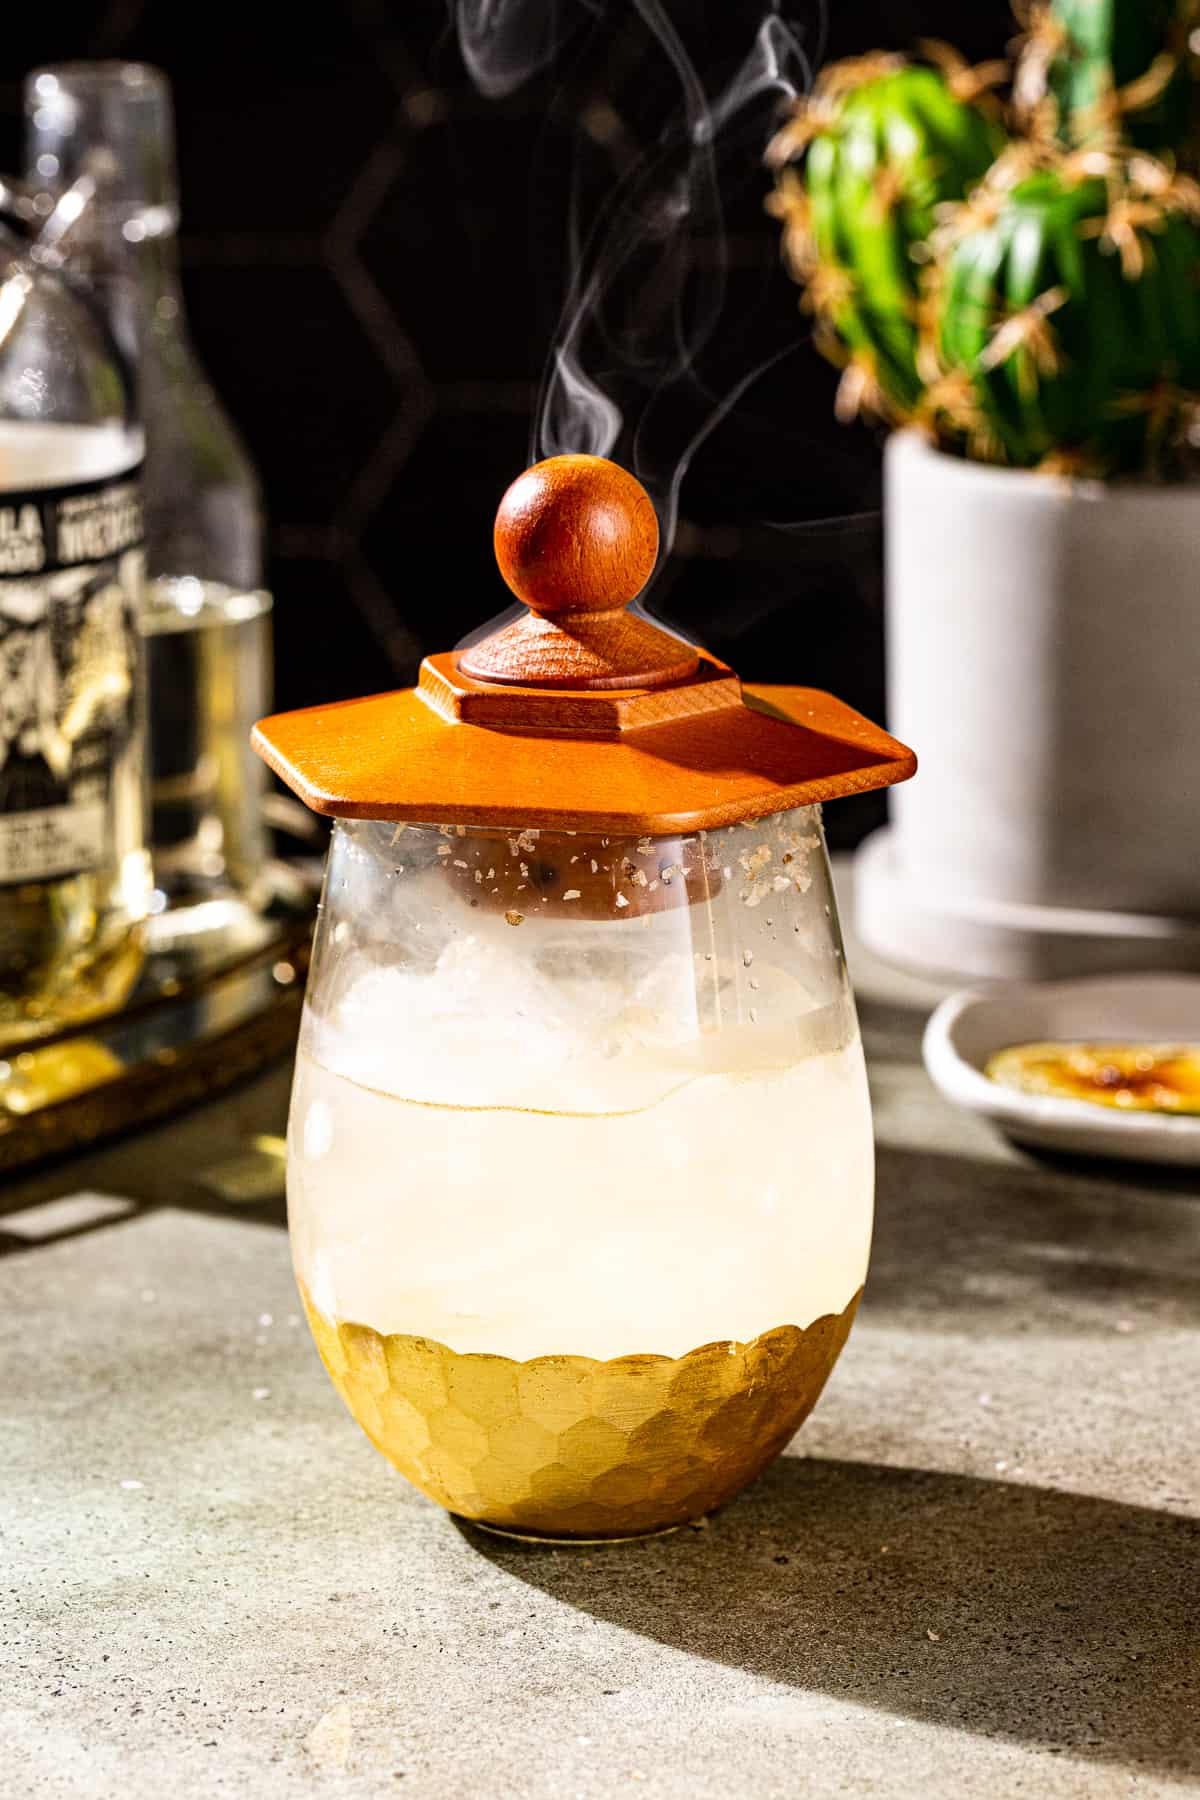 Wooden cocktail smoker on top of the margarita serving glass. The glass is filled with the margarita, ice and smoke, and wisps of smoke are rising from the cocktail smoker.